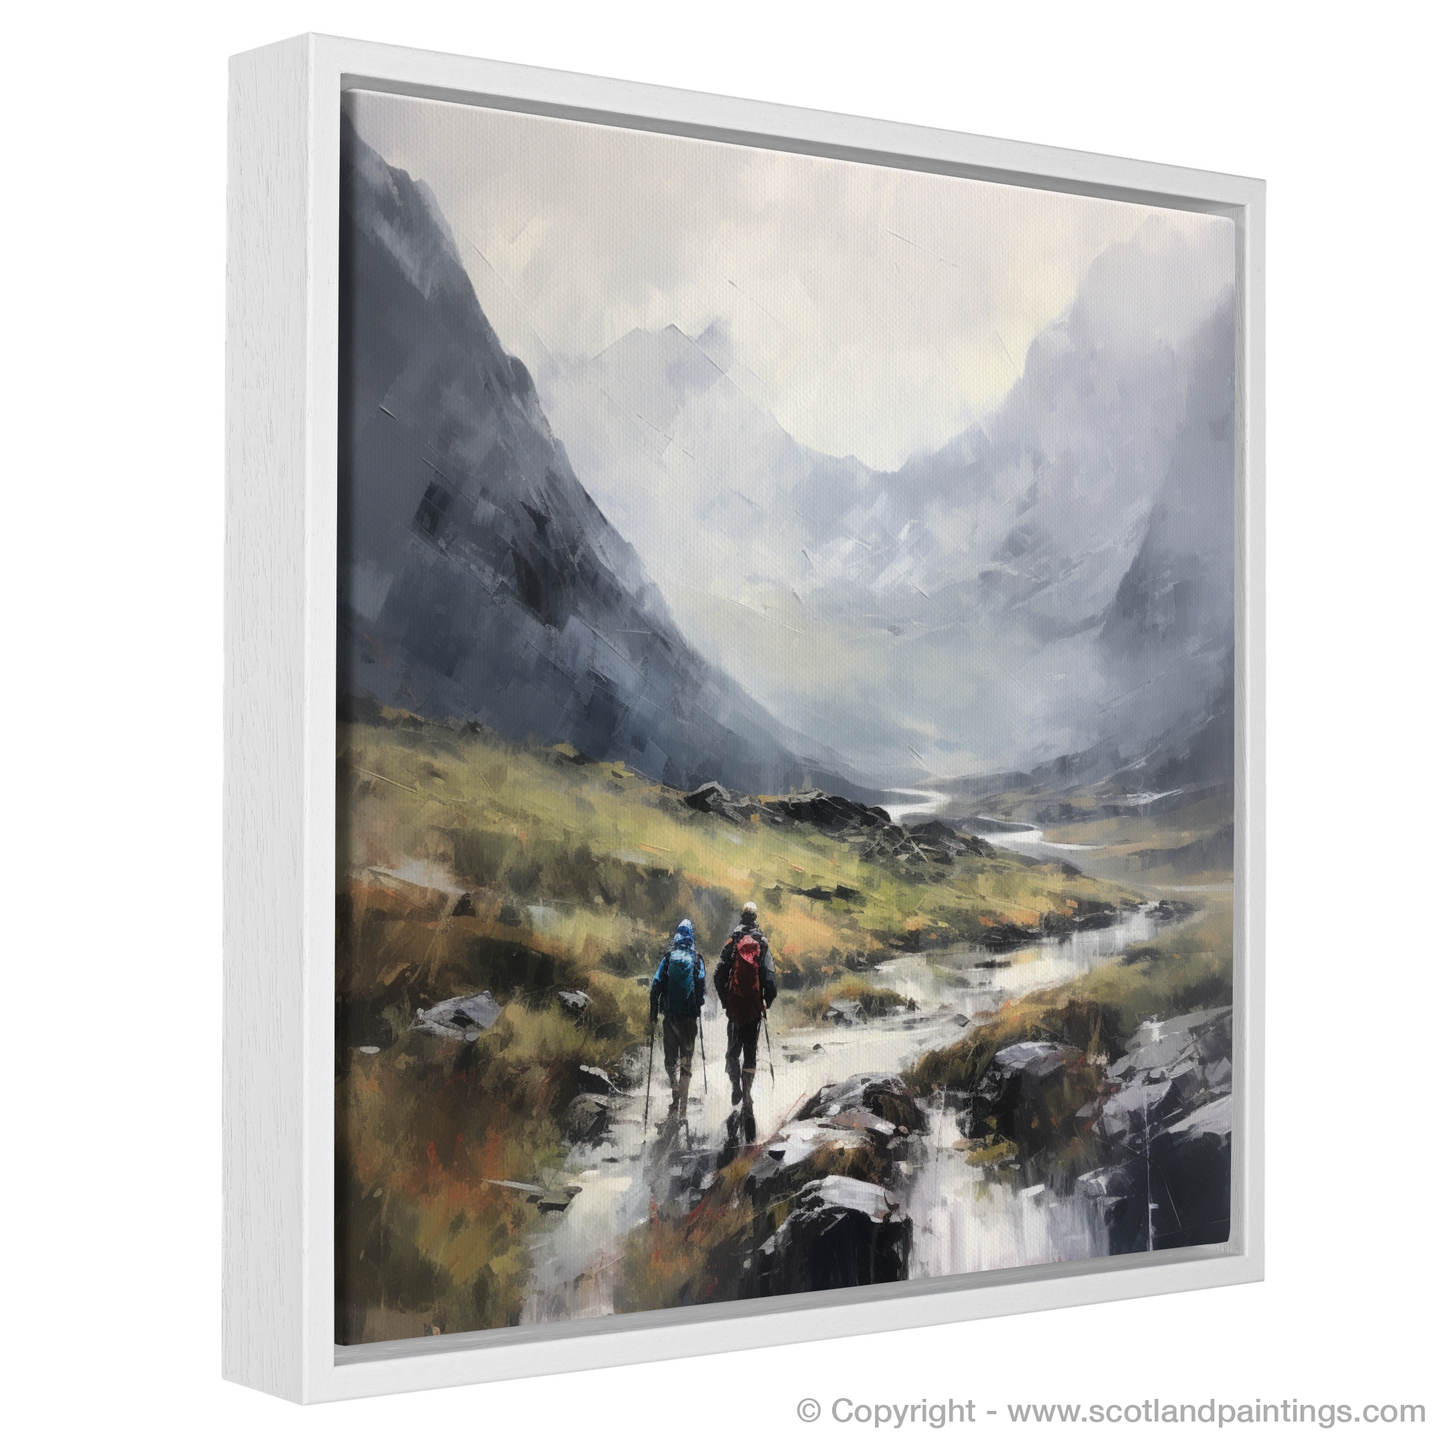 Painting and Art Print of Hikers in Glencoe entitled "Hikers' Haven: The Essence of Glencoe".